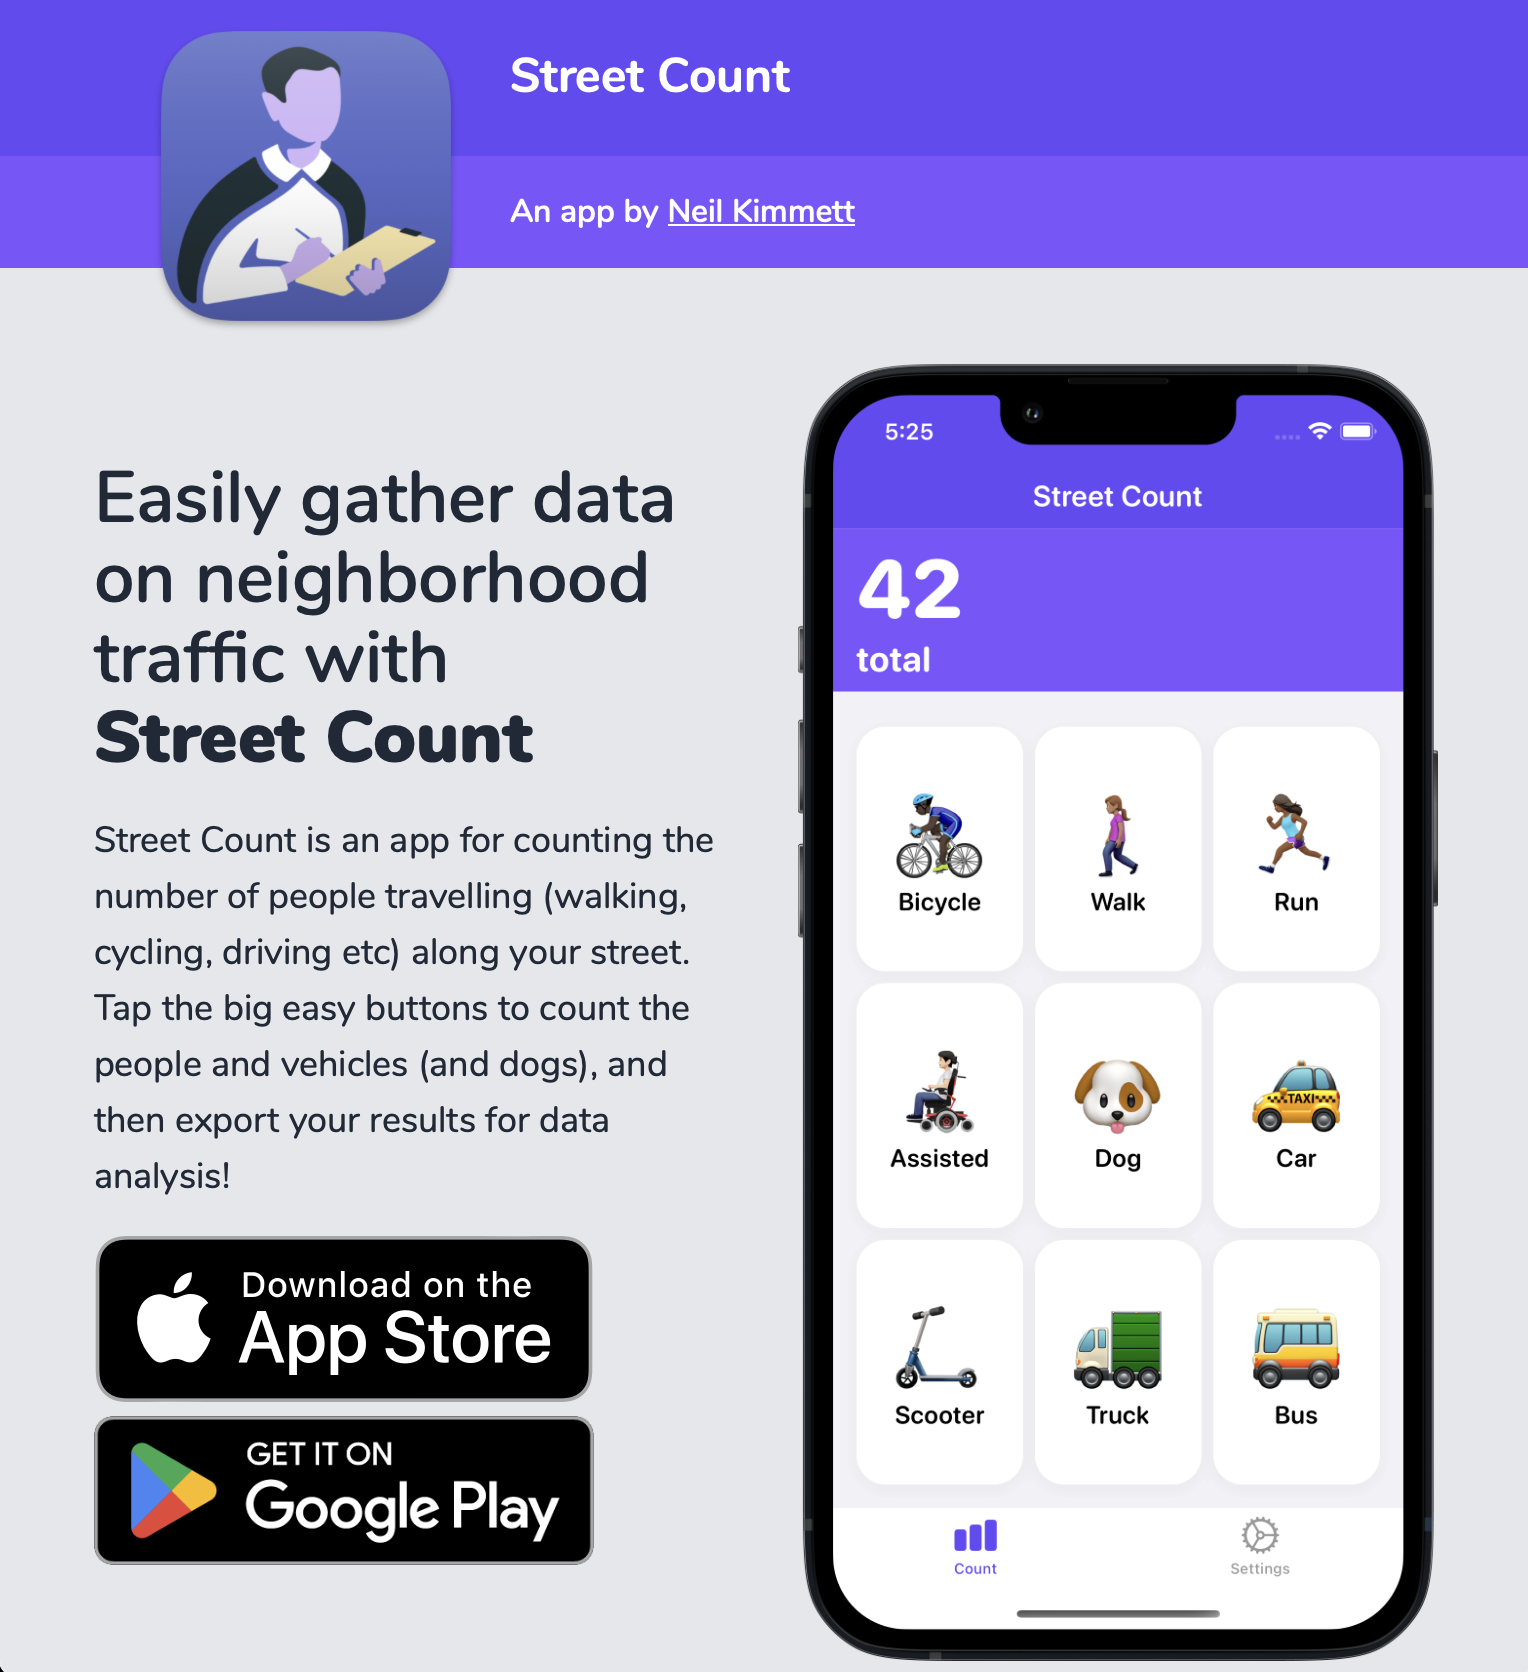 A screenshot of the promotional website for Street Count